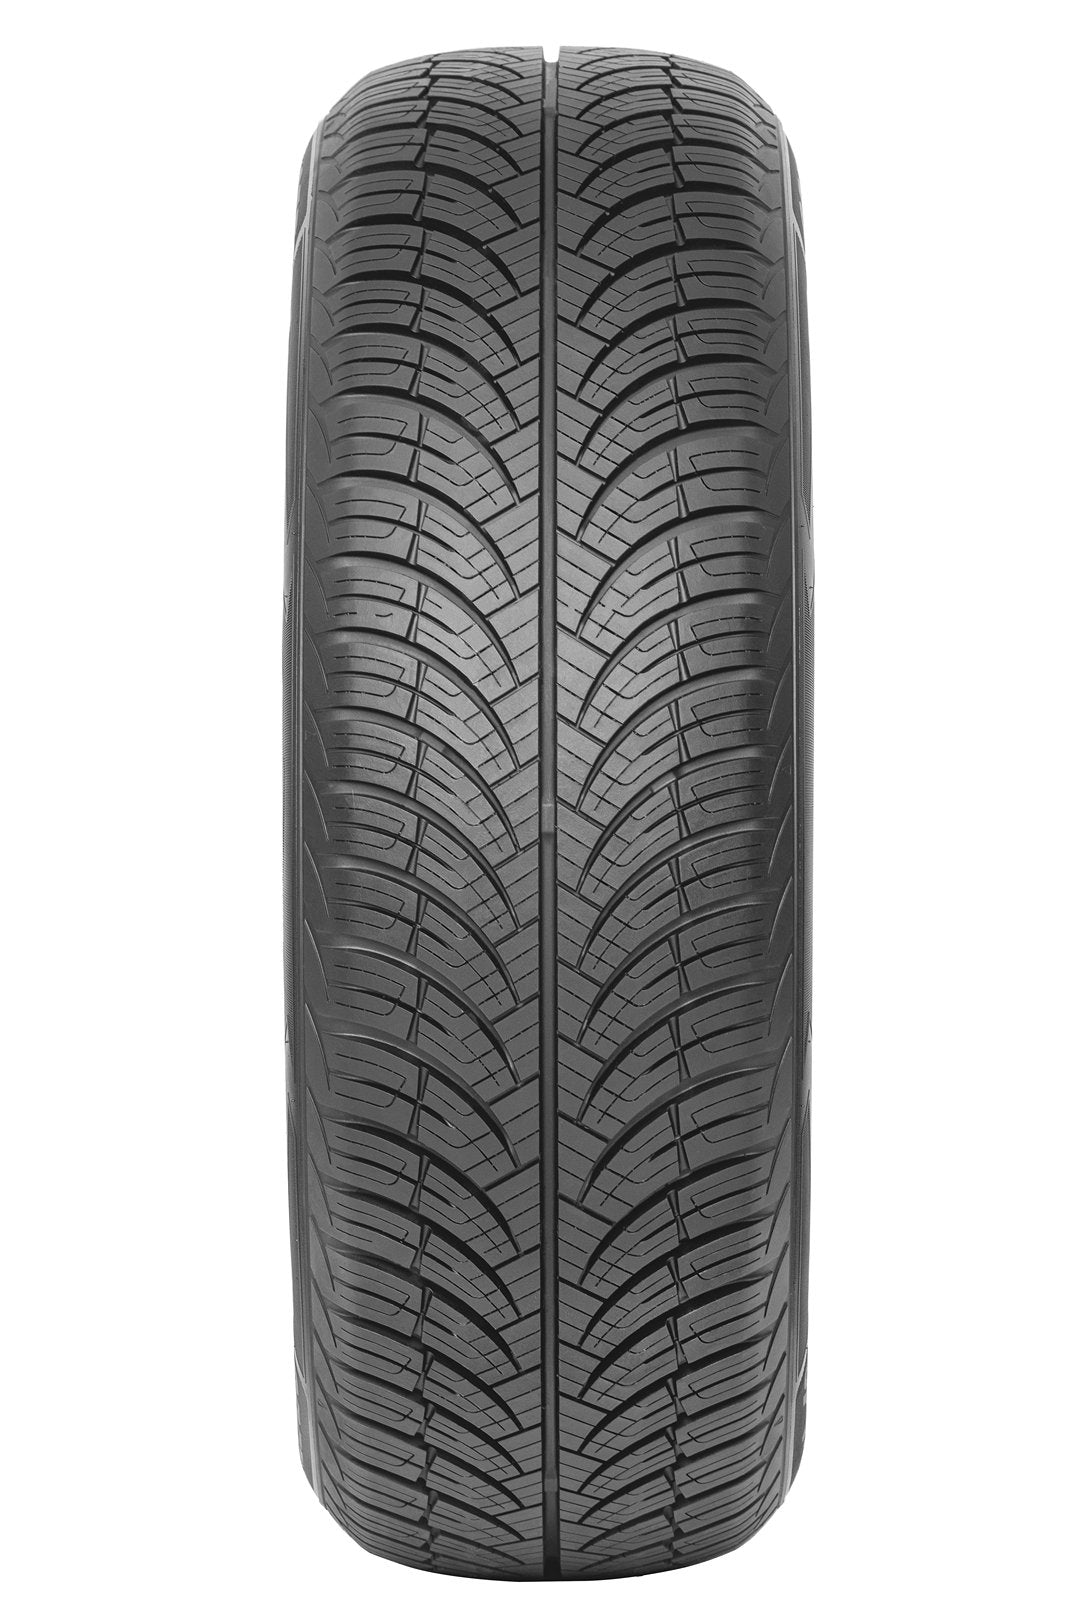 225/60R17 GRENLANDER GREENWING A/S ALL WEATHER - Toee Tire